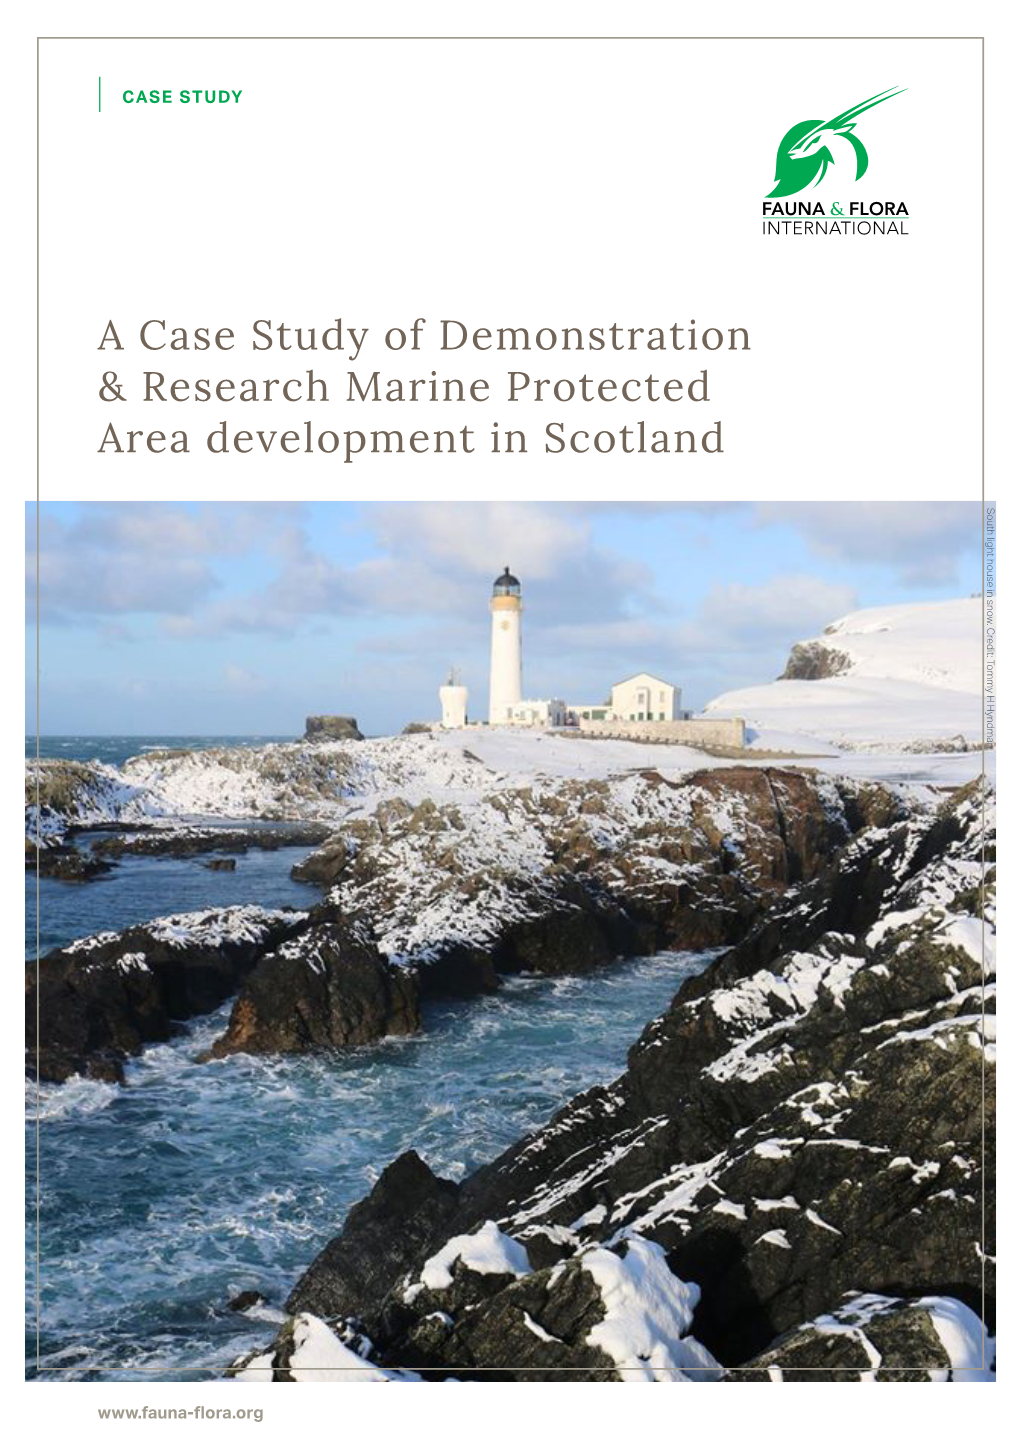 A Case Study of Demonstration & Research Marine Protected Area